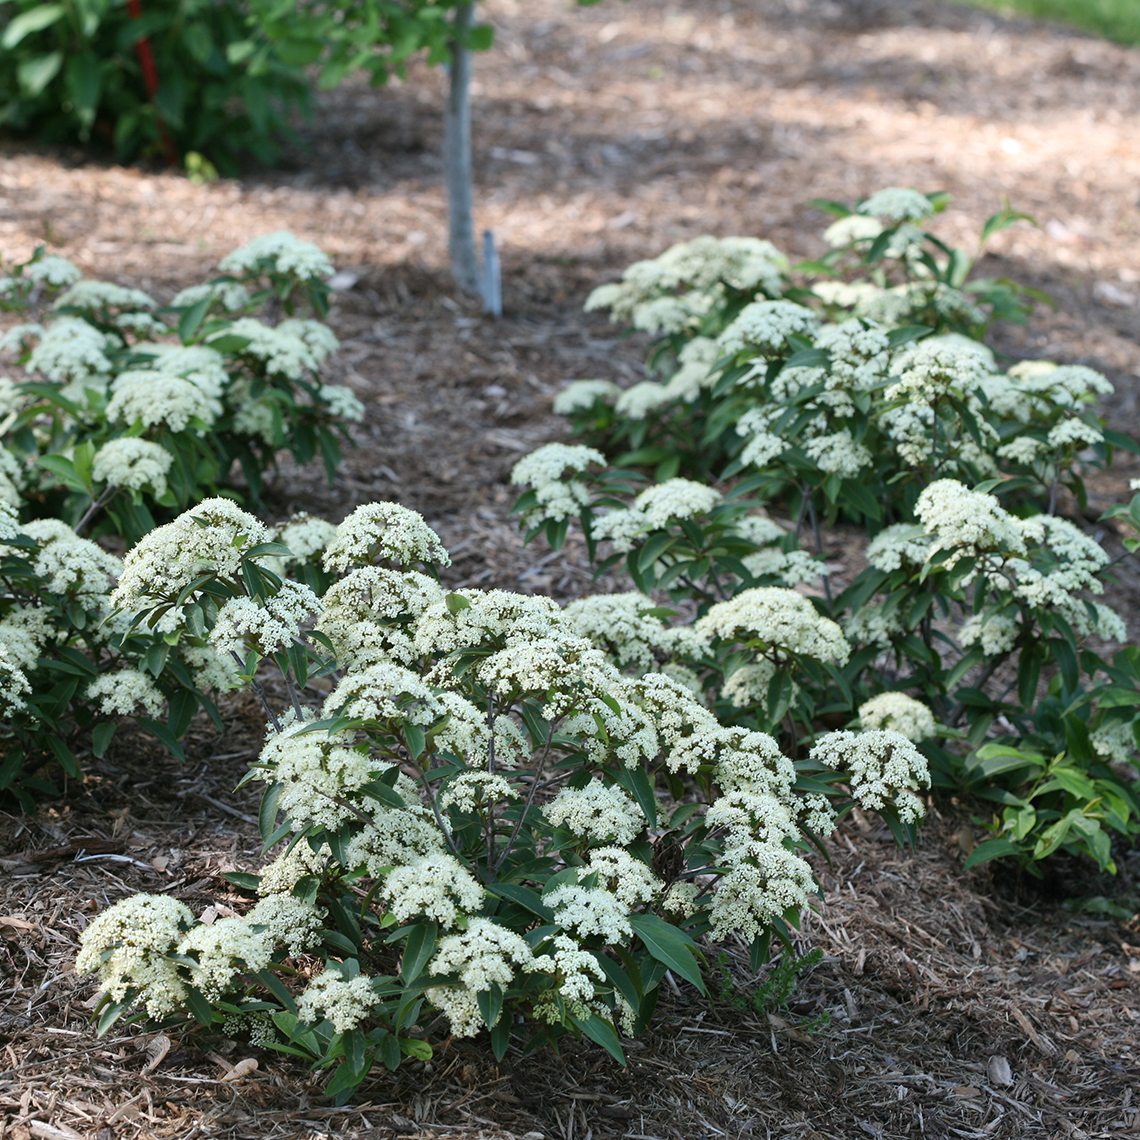 Four specimens of Lil Ditty viburnum in a landscape